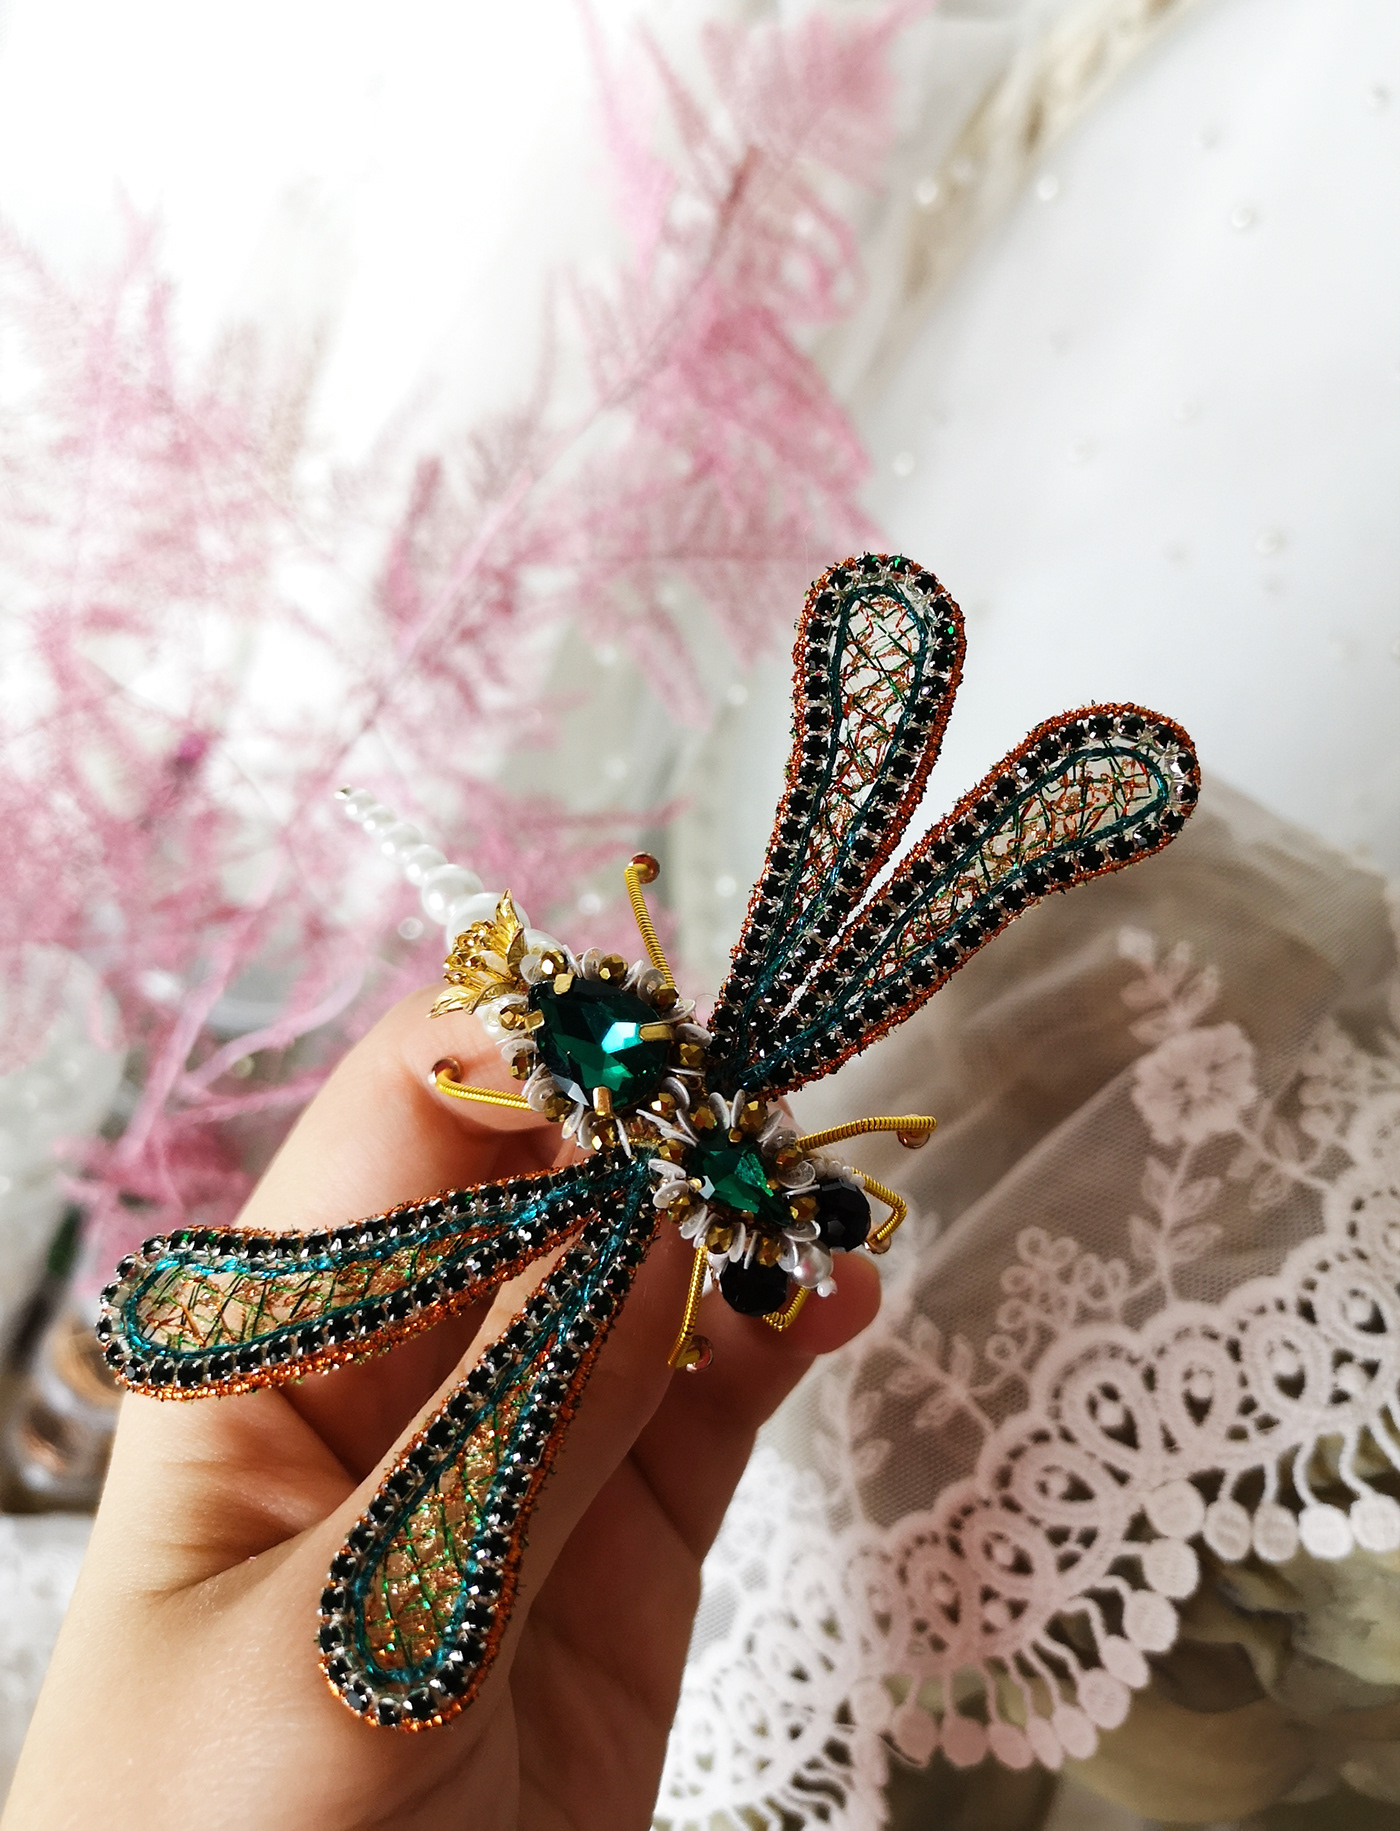 Beaded jewelry jewelry textile jewelry textile art wearable art dragonfly pin dragonfly brooch insect jewelry insect brooch fly brooch